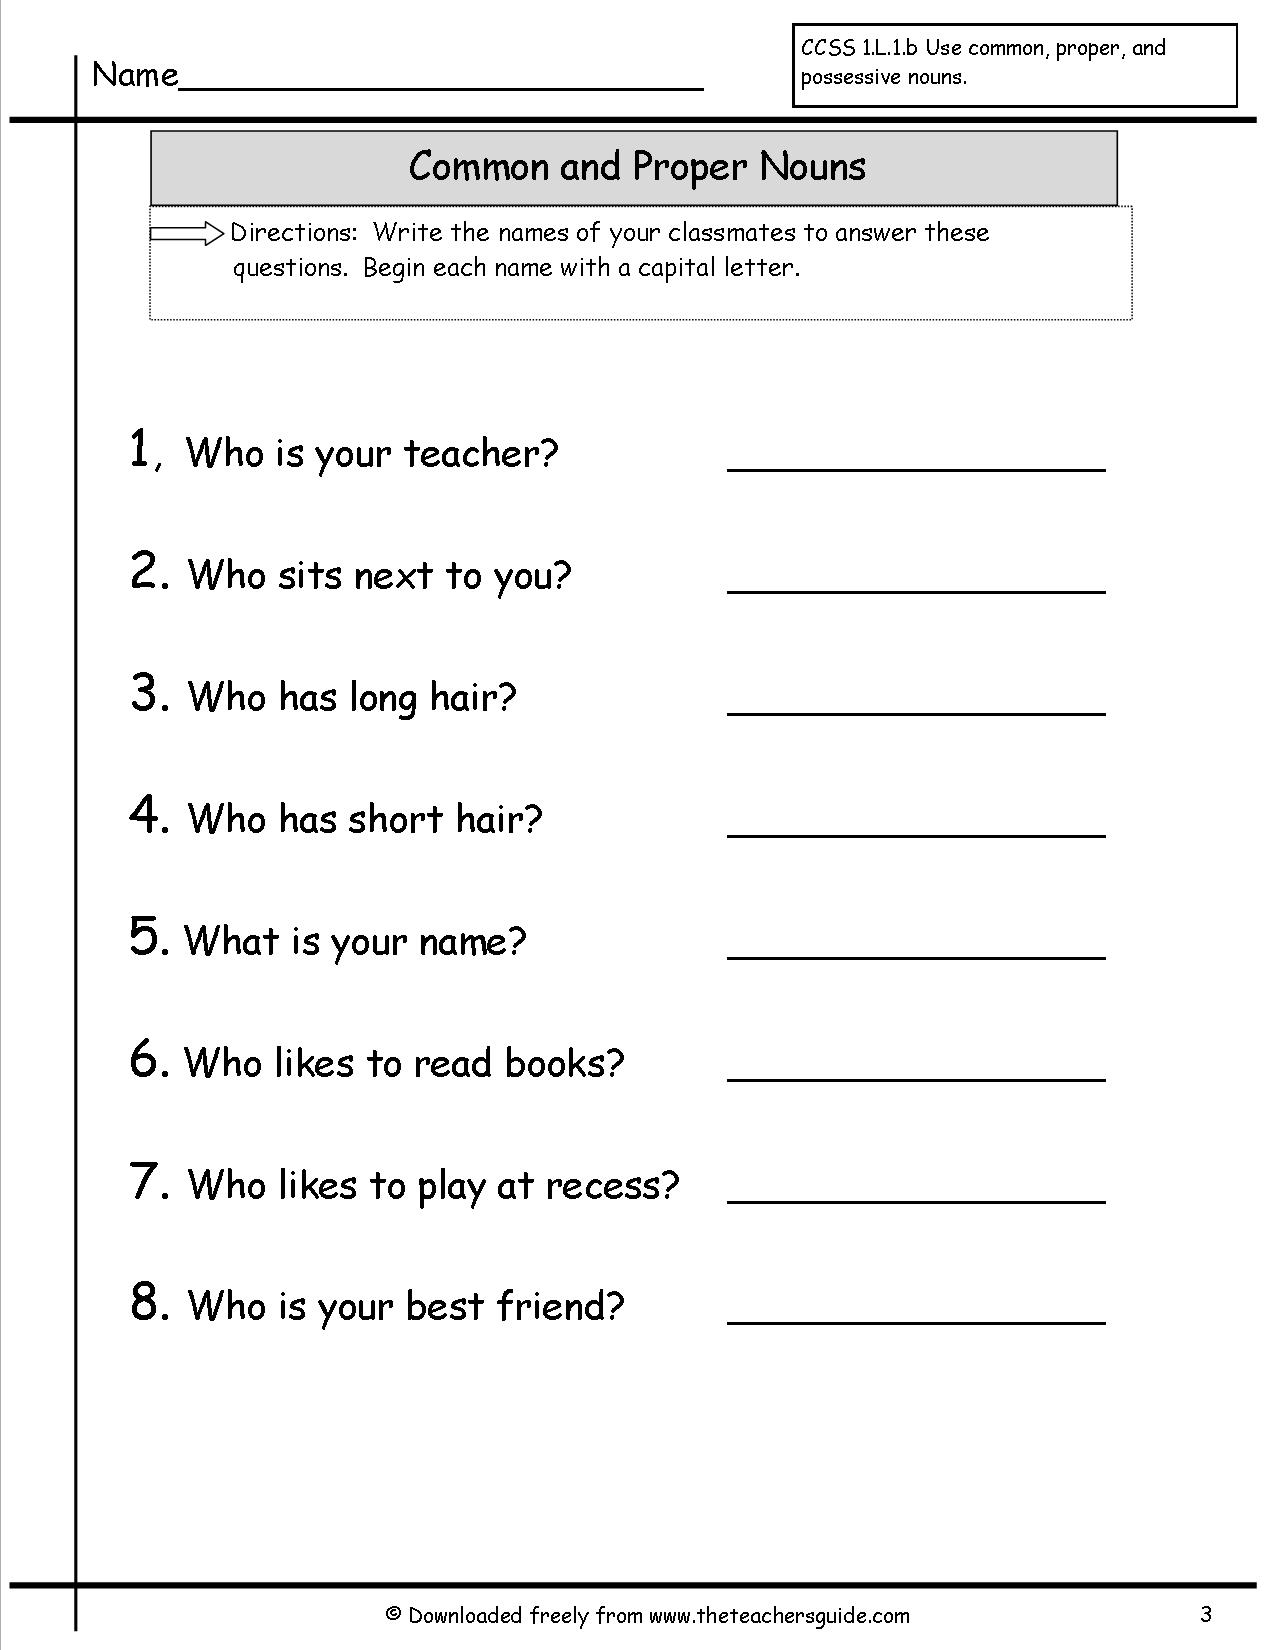 common-and-proper-noun-worksheet-for-class-3-pin-on-first-grade